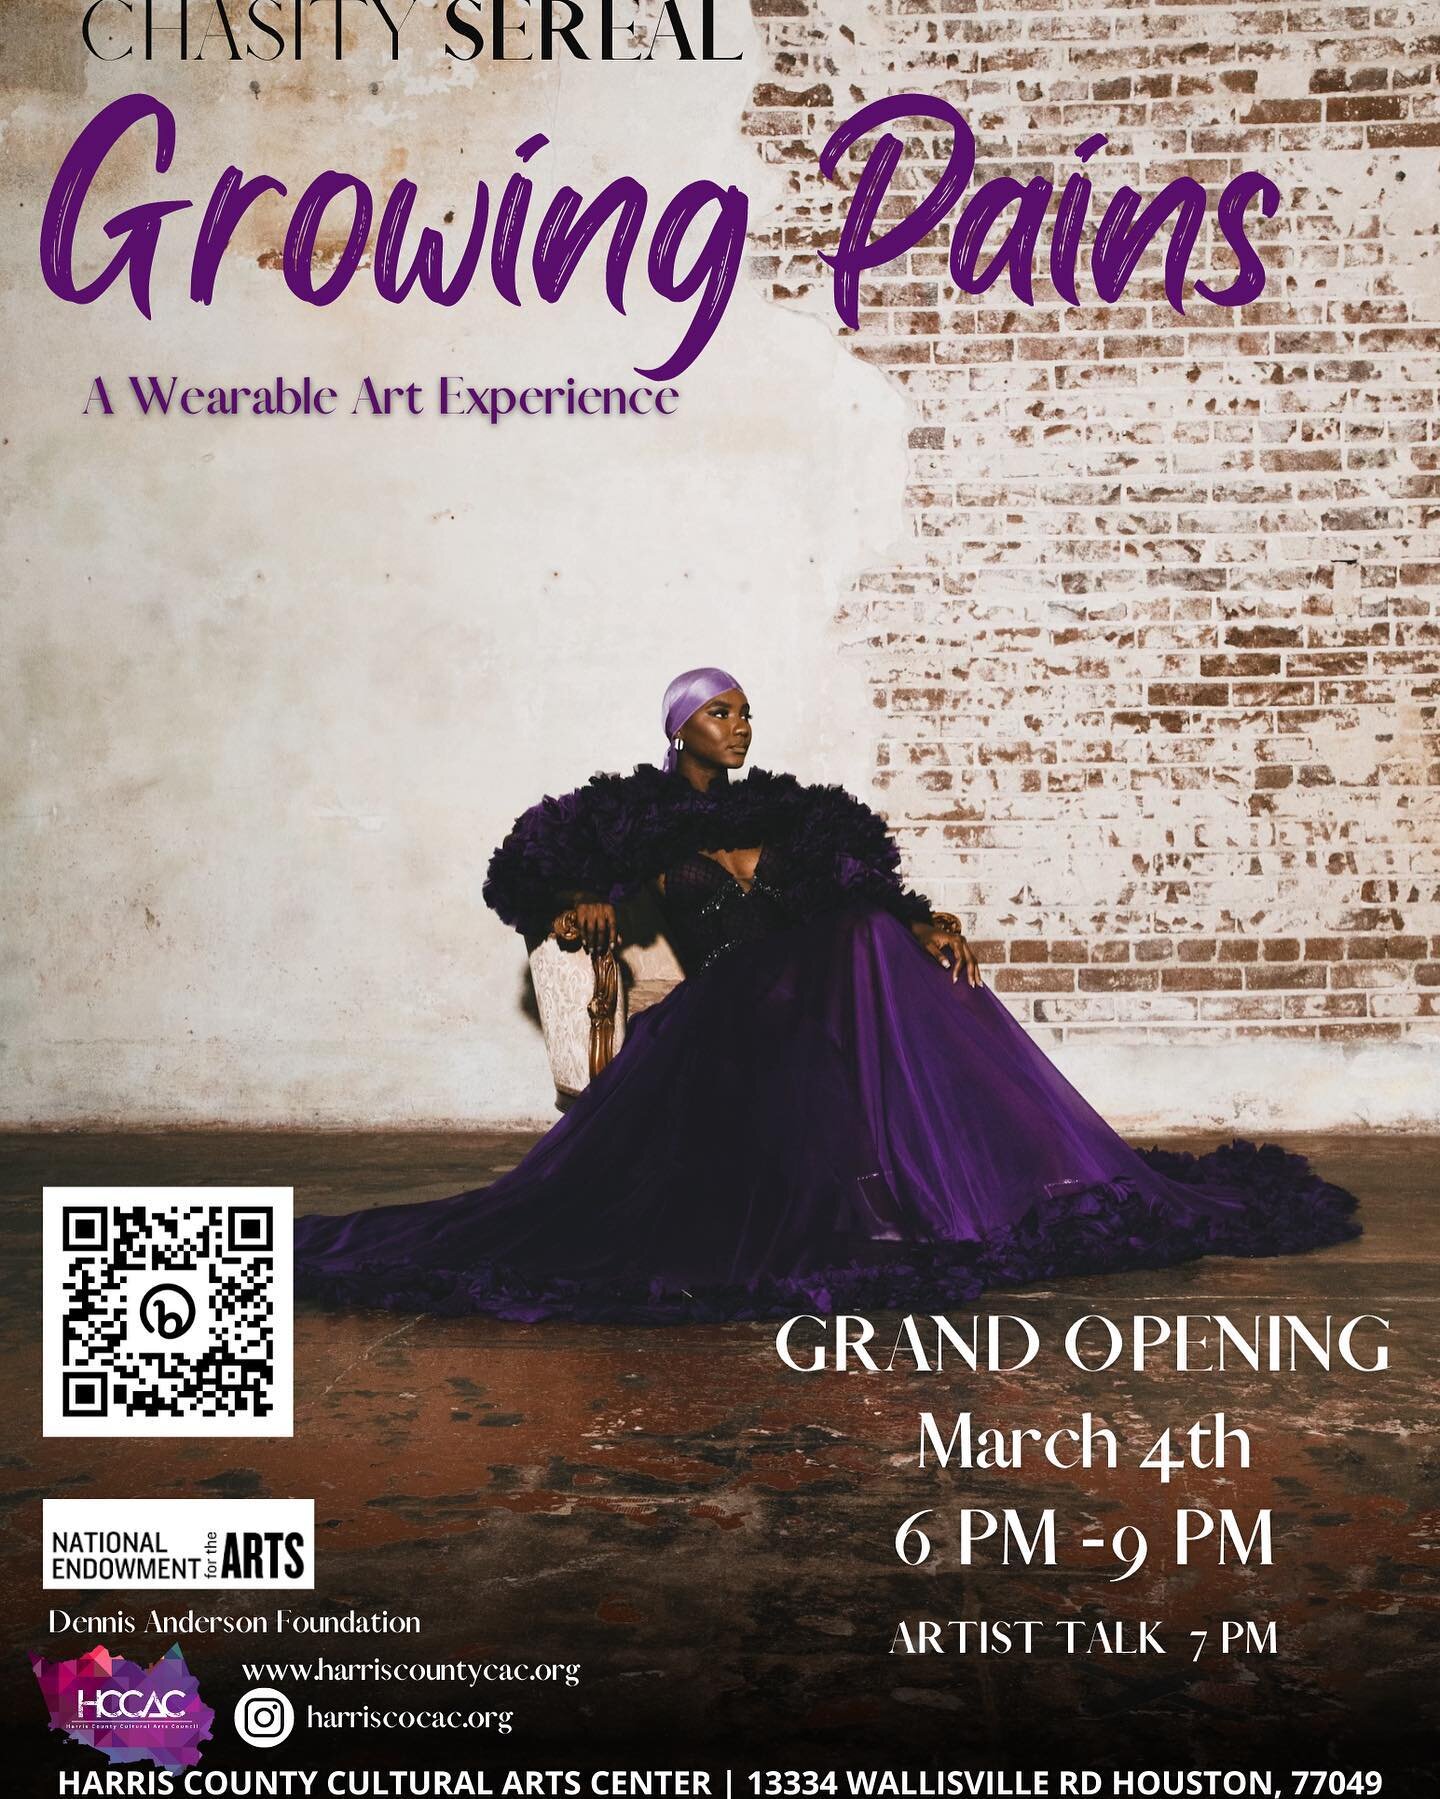 &ldquo;My goal is to bring an artistic expression when it comes to fashion design. I want my pieces to tell stories. I want them to be remembered.&rdquo;
 
We&rsquo;re excited to announce @chasitysereal &lsquo;s upcoming exhibition, #GrowingPains, is